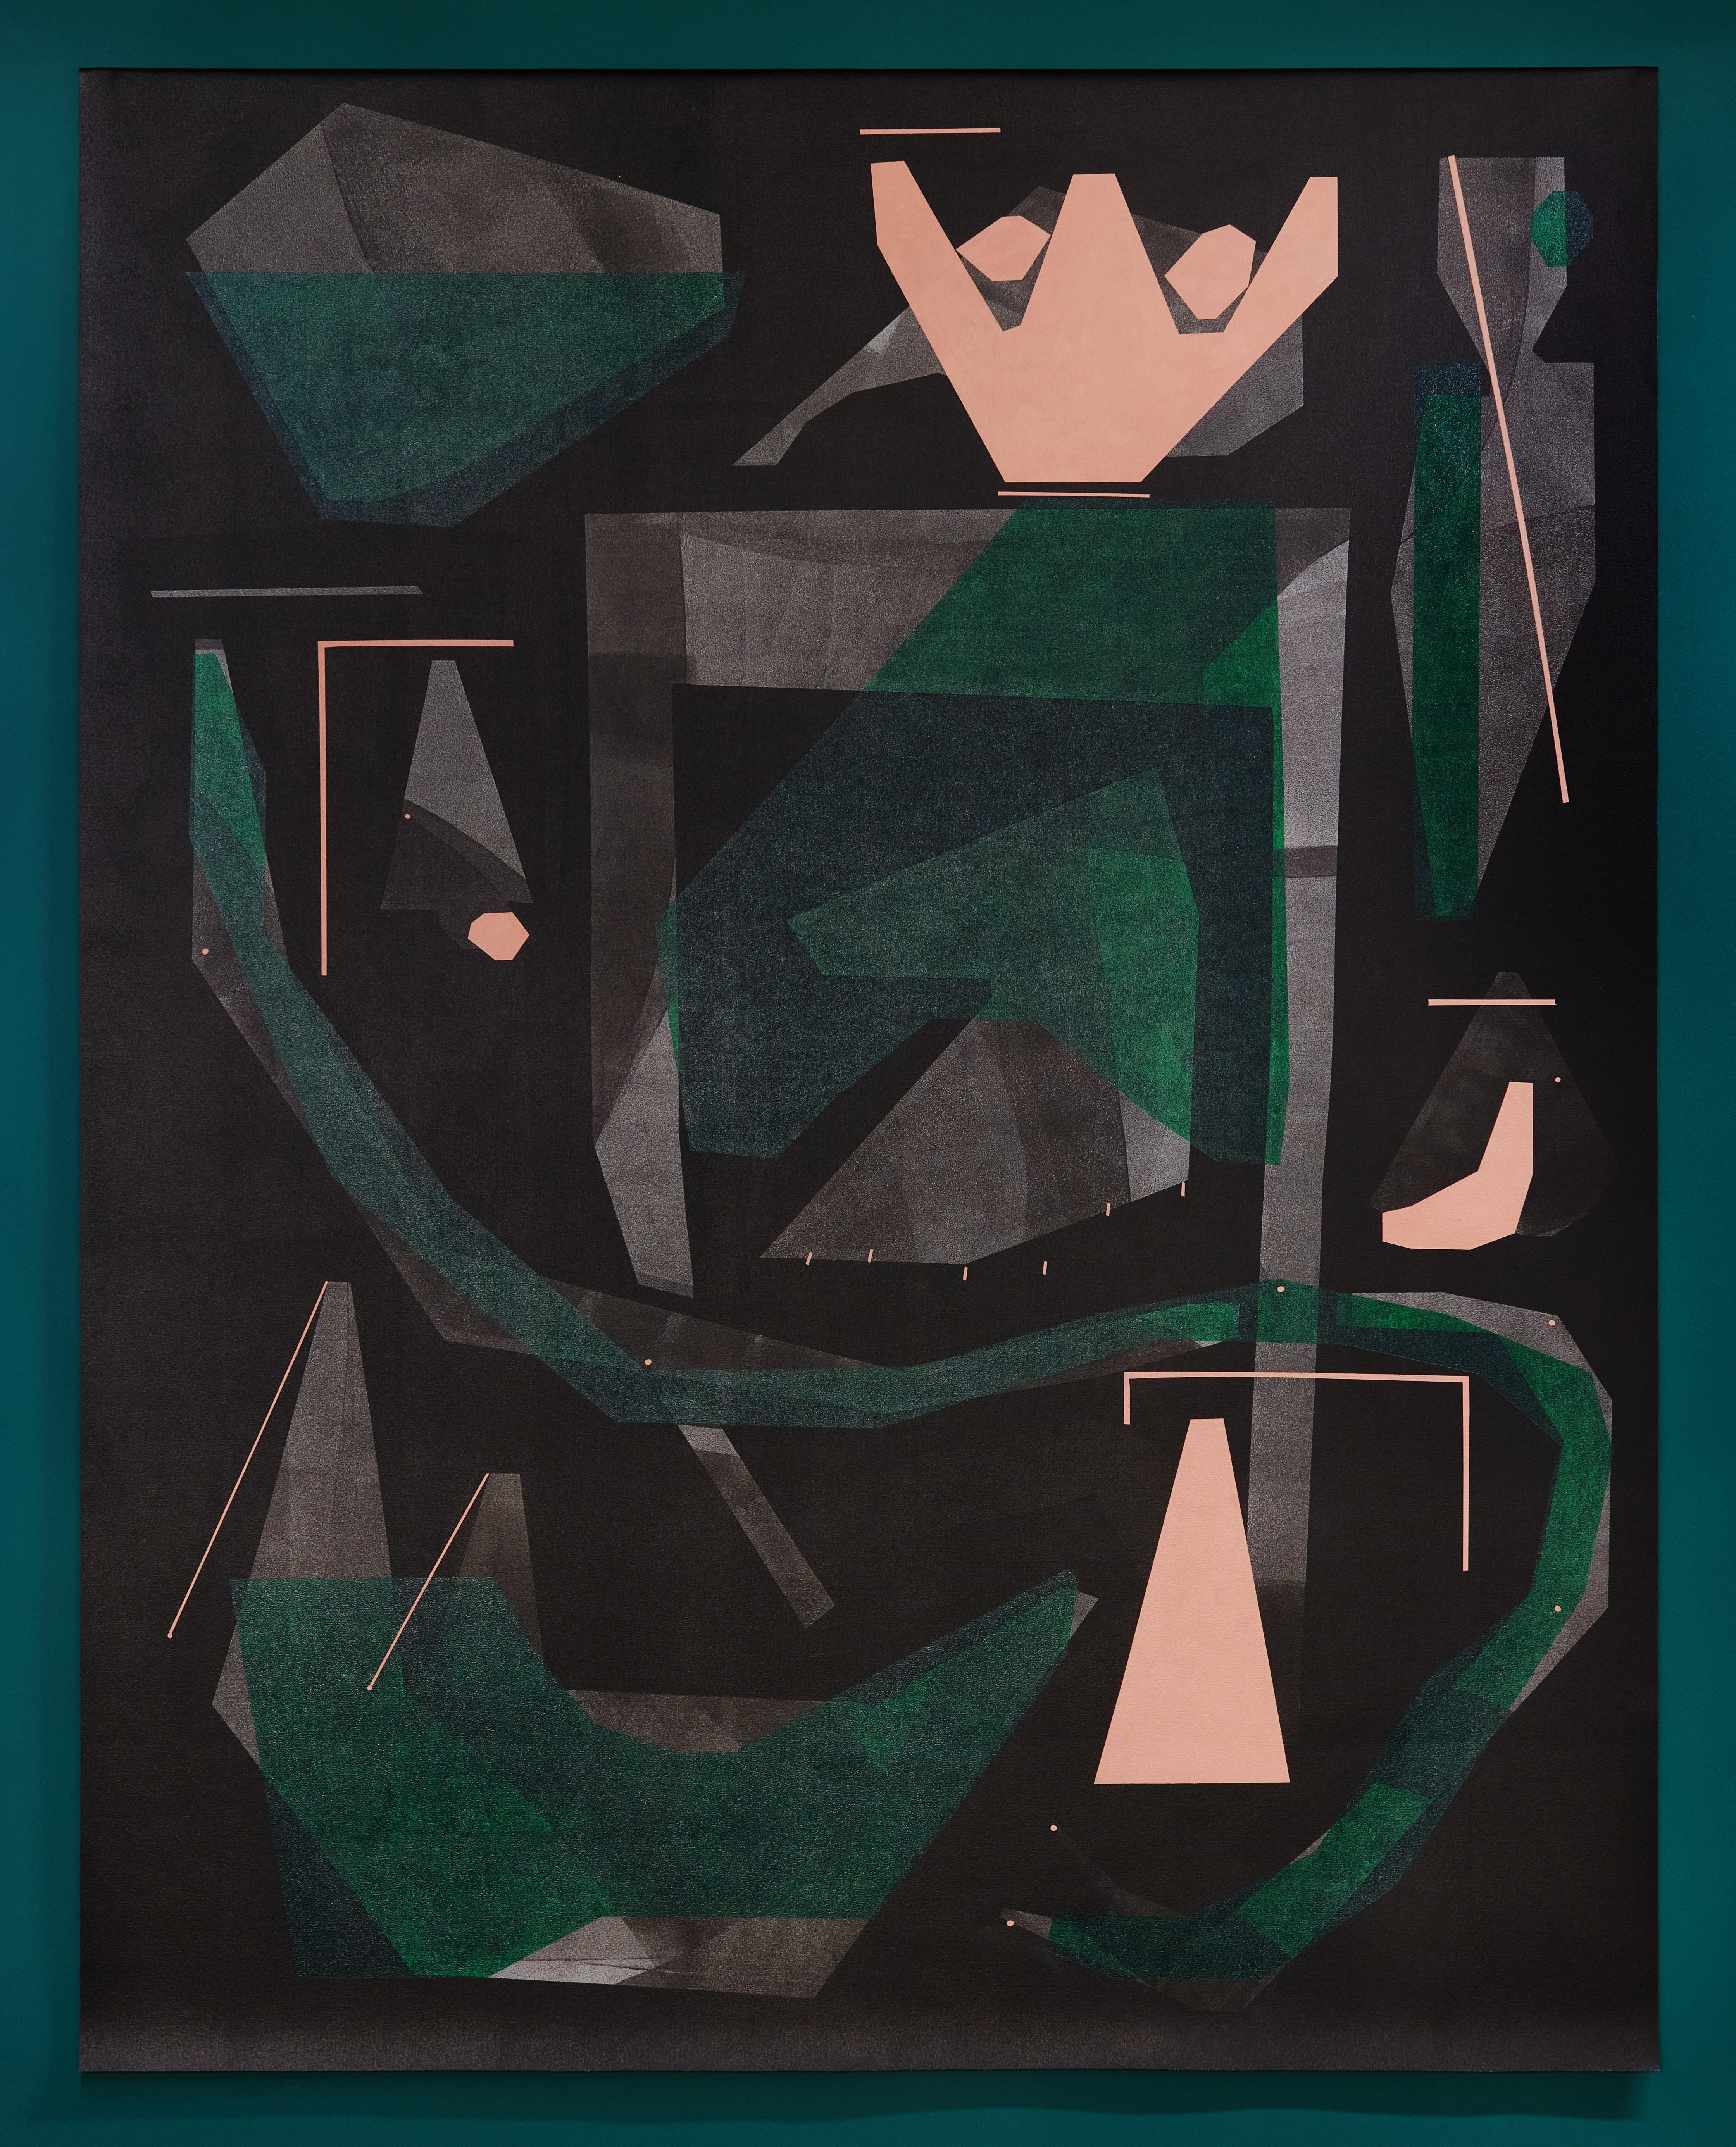 A dark painting of abstract forms hangs on a green wall.